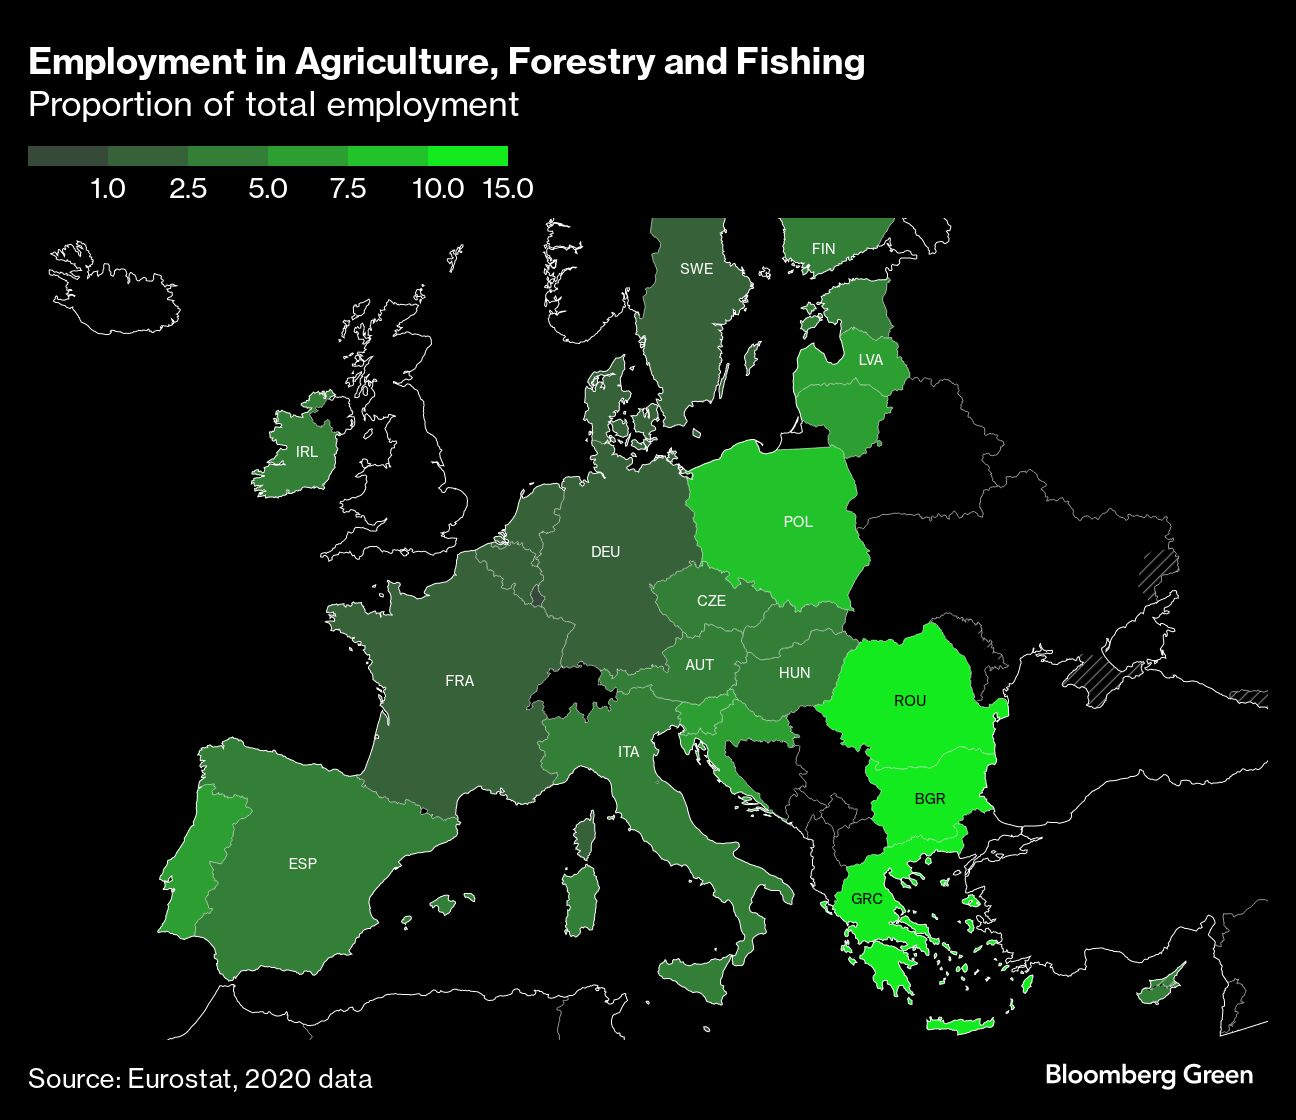 EMPLOYMENT IN AGRICULTURE EUROPE BLOOMBERG.png